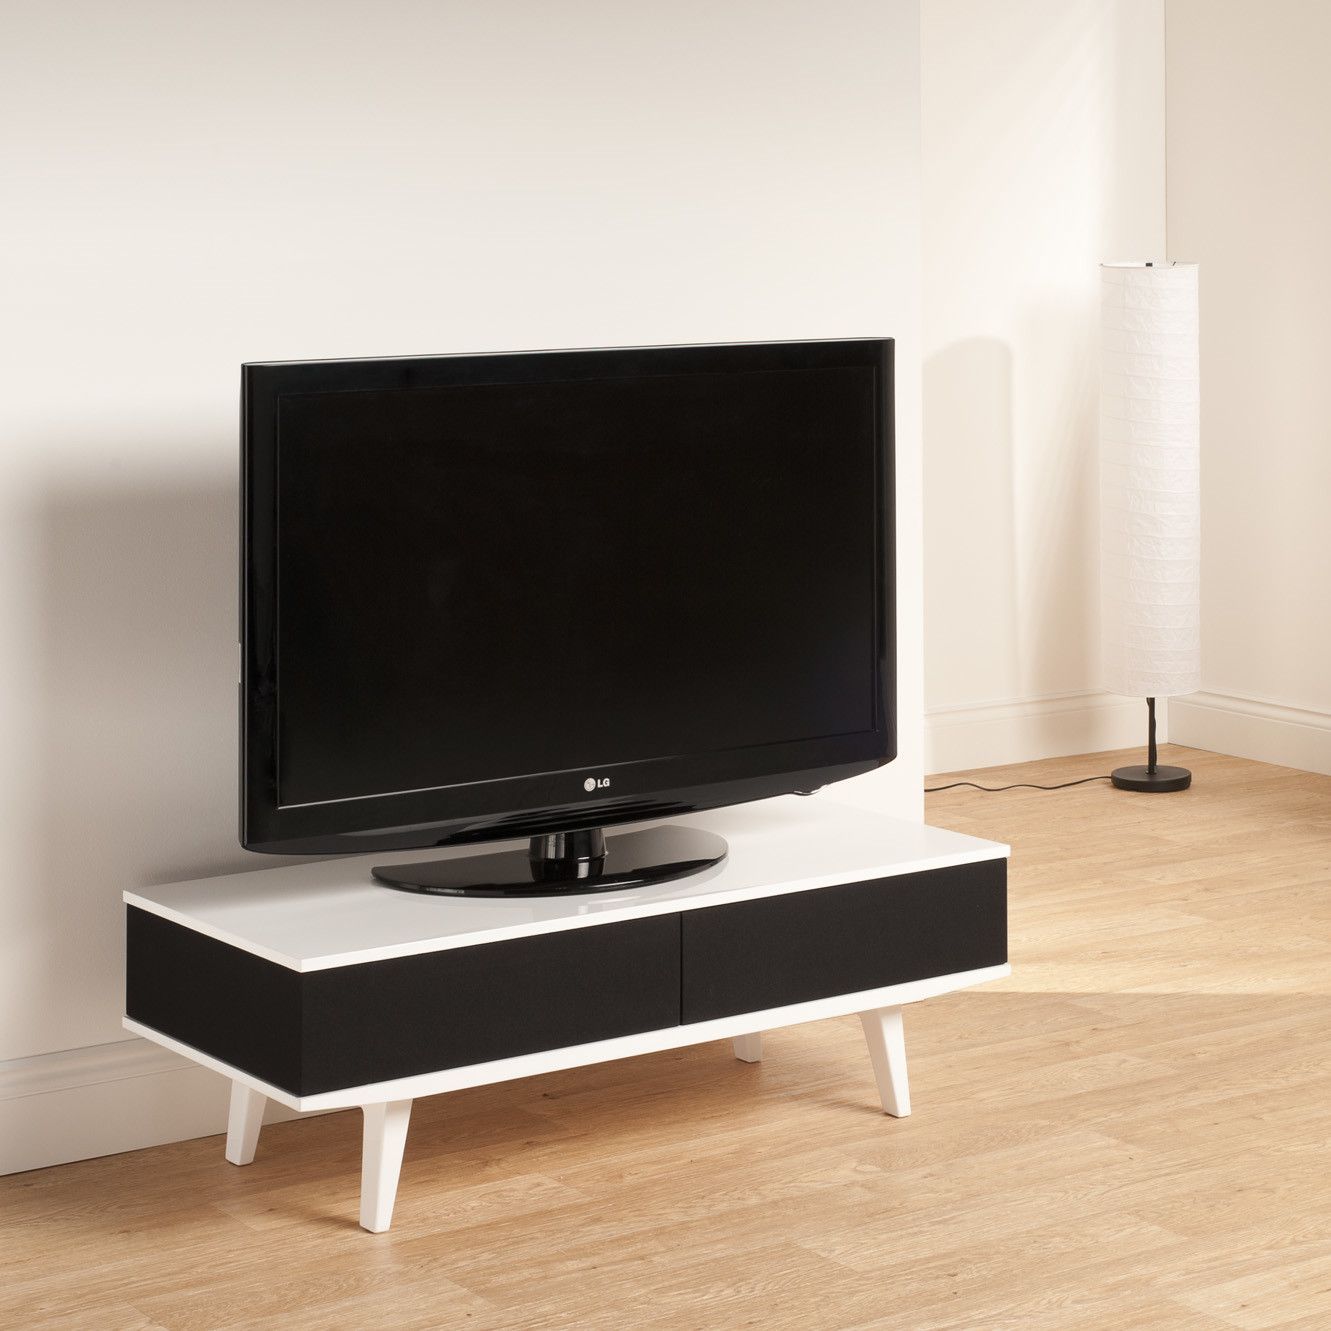 $289 Techlink Fabrik 44" Low Profile Tv Stand & Reviews Inside Modern Low Tv Stands (View 1 of 15)